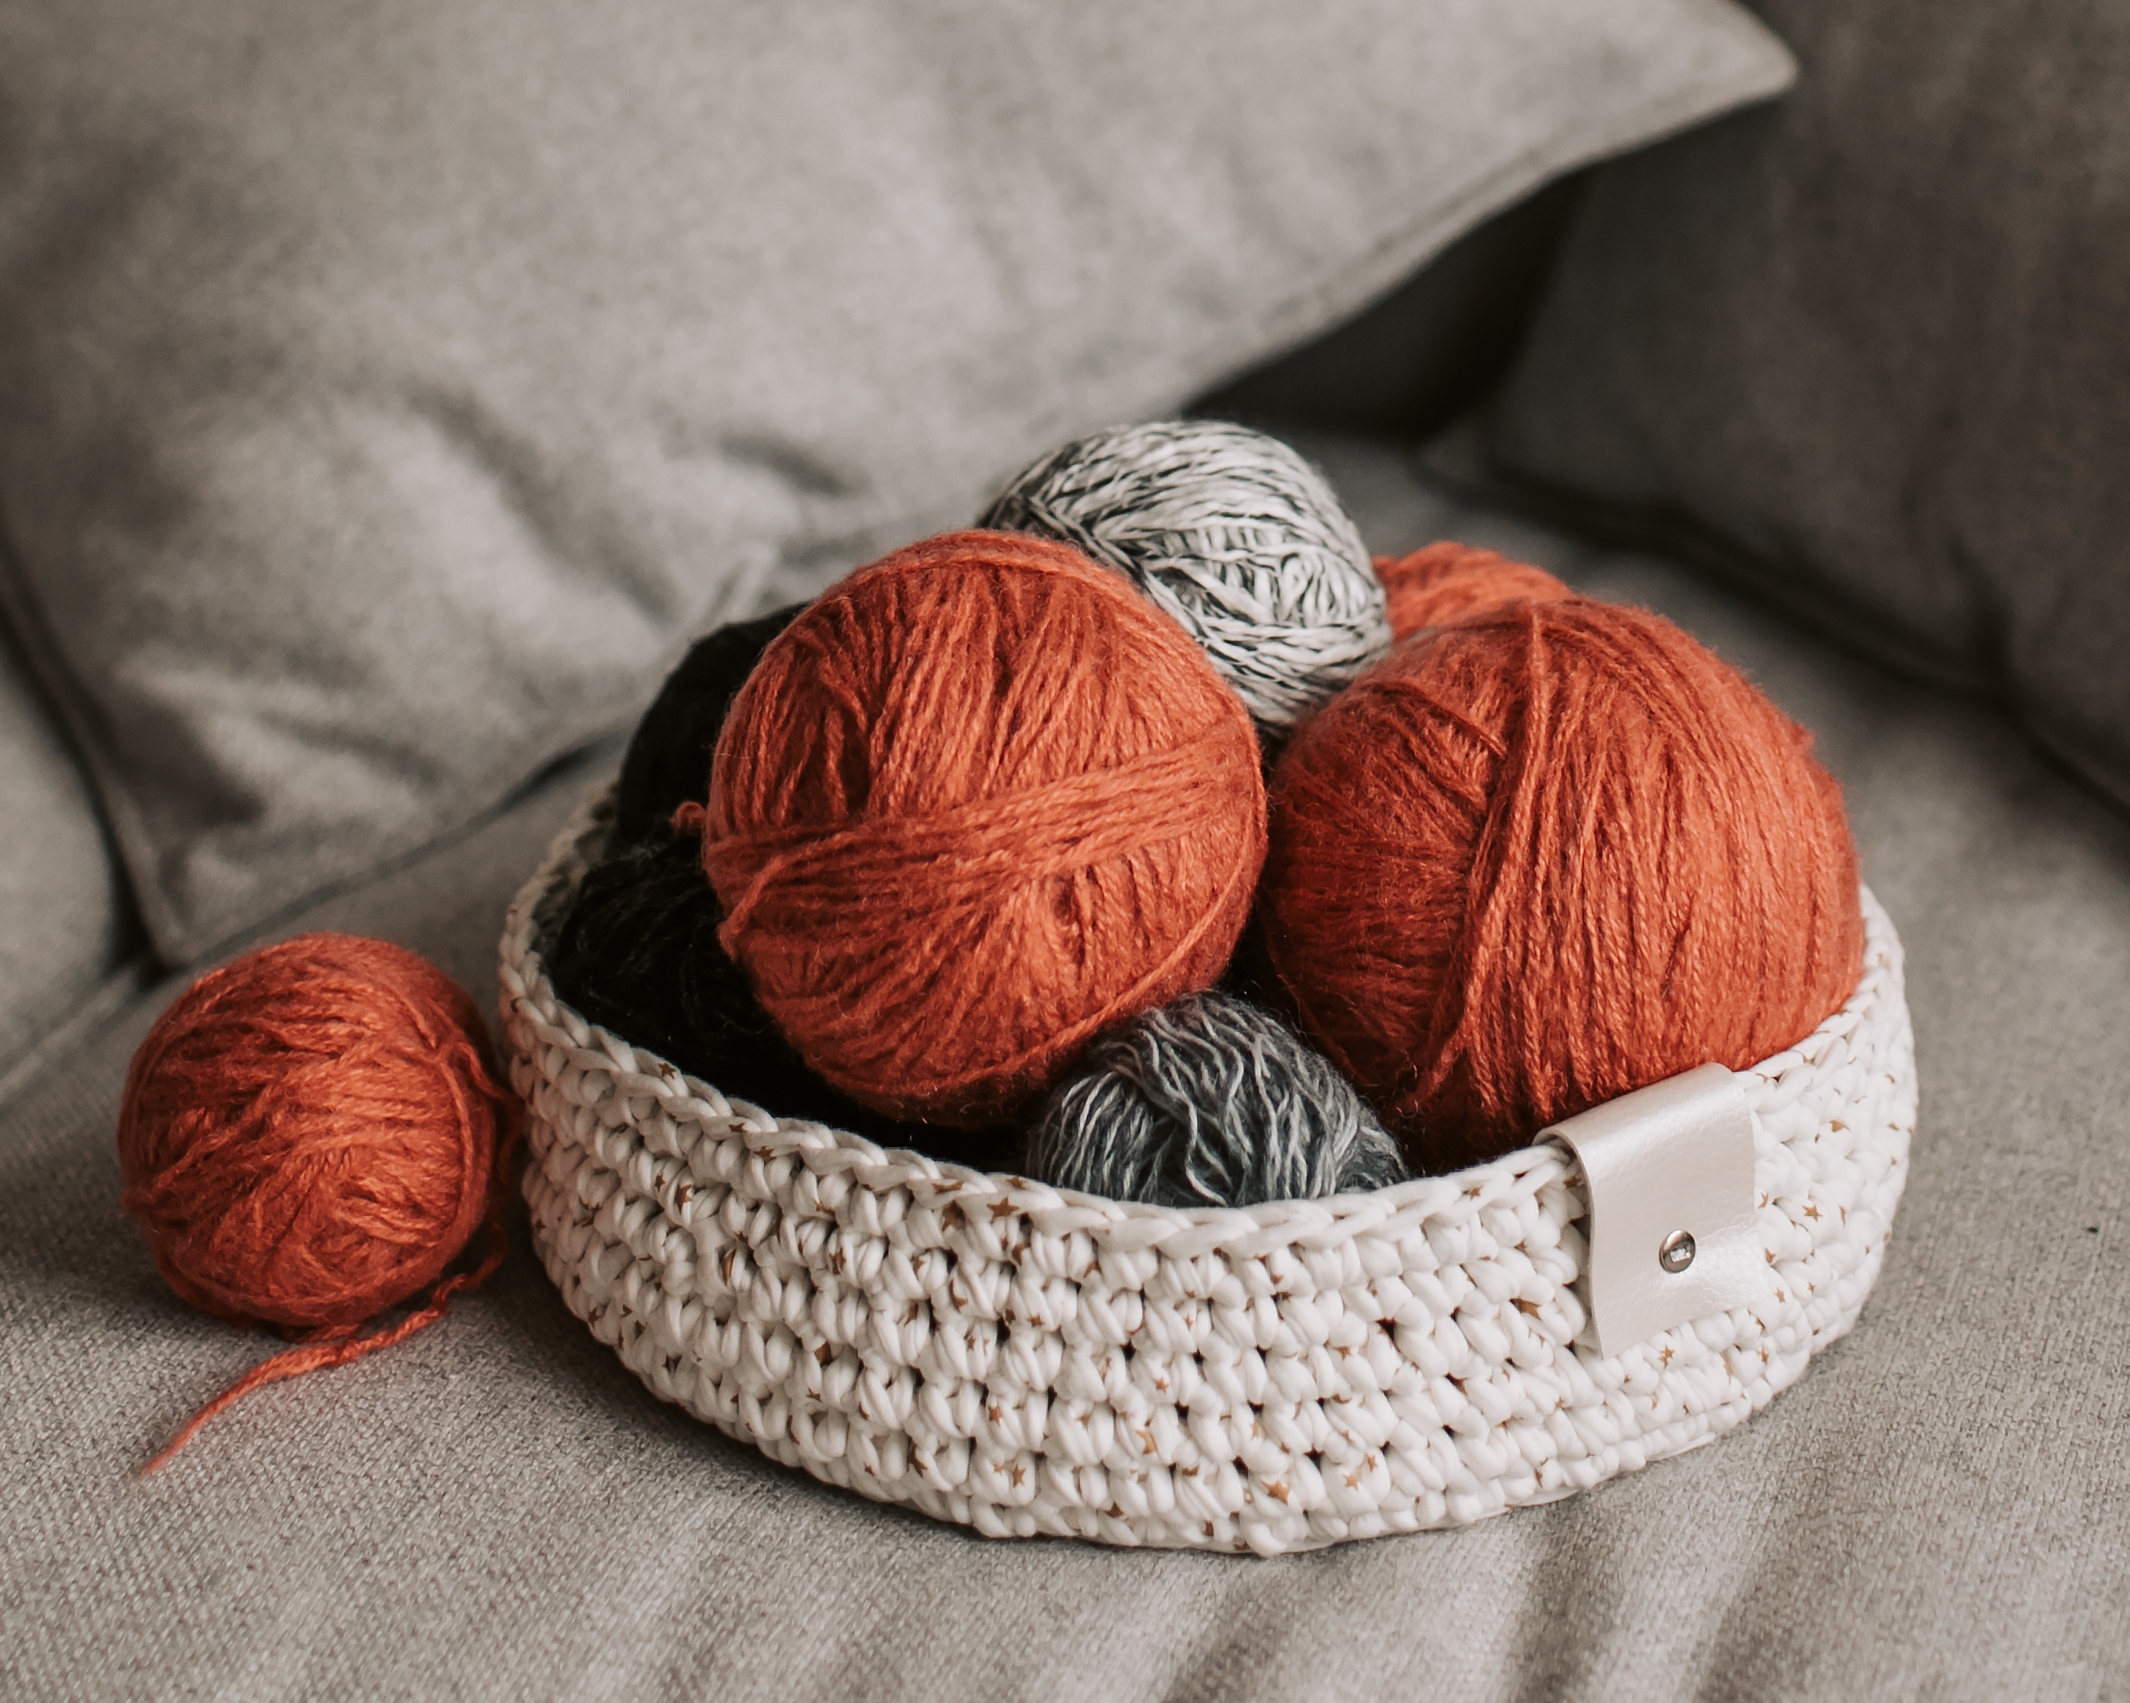 Unravelling the Best Yarn for Knitting: More Than 10 Types to